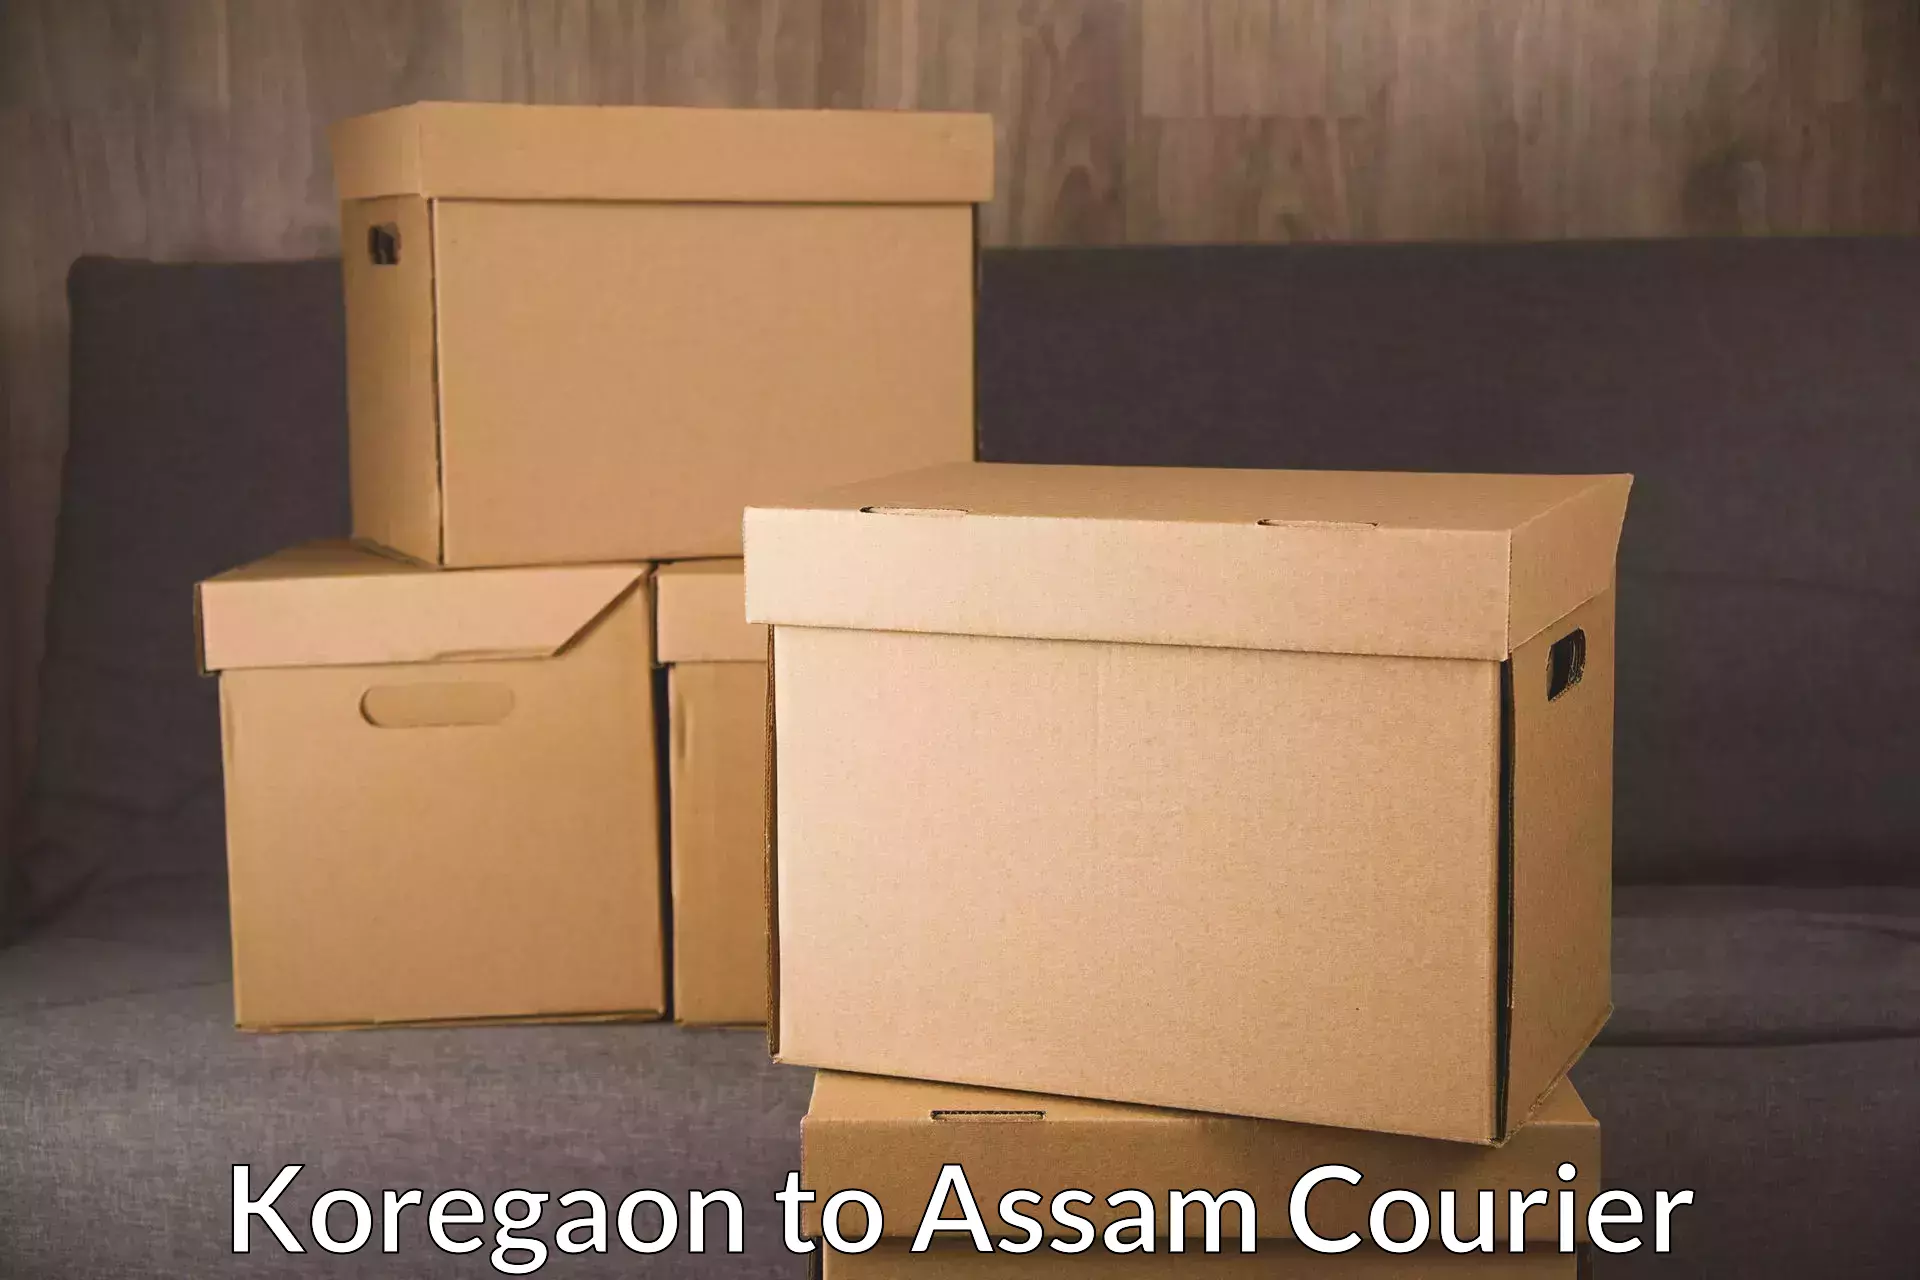 Reliable shipping partners Koregaon to Assam